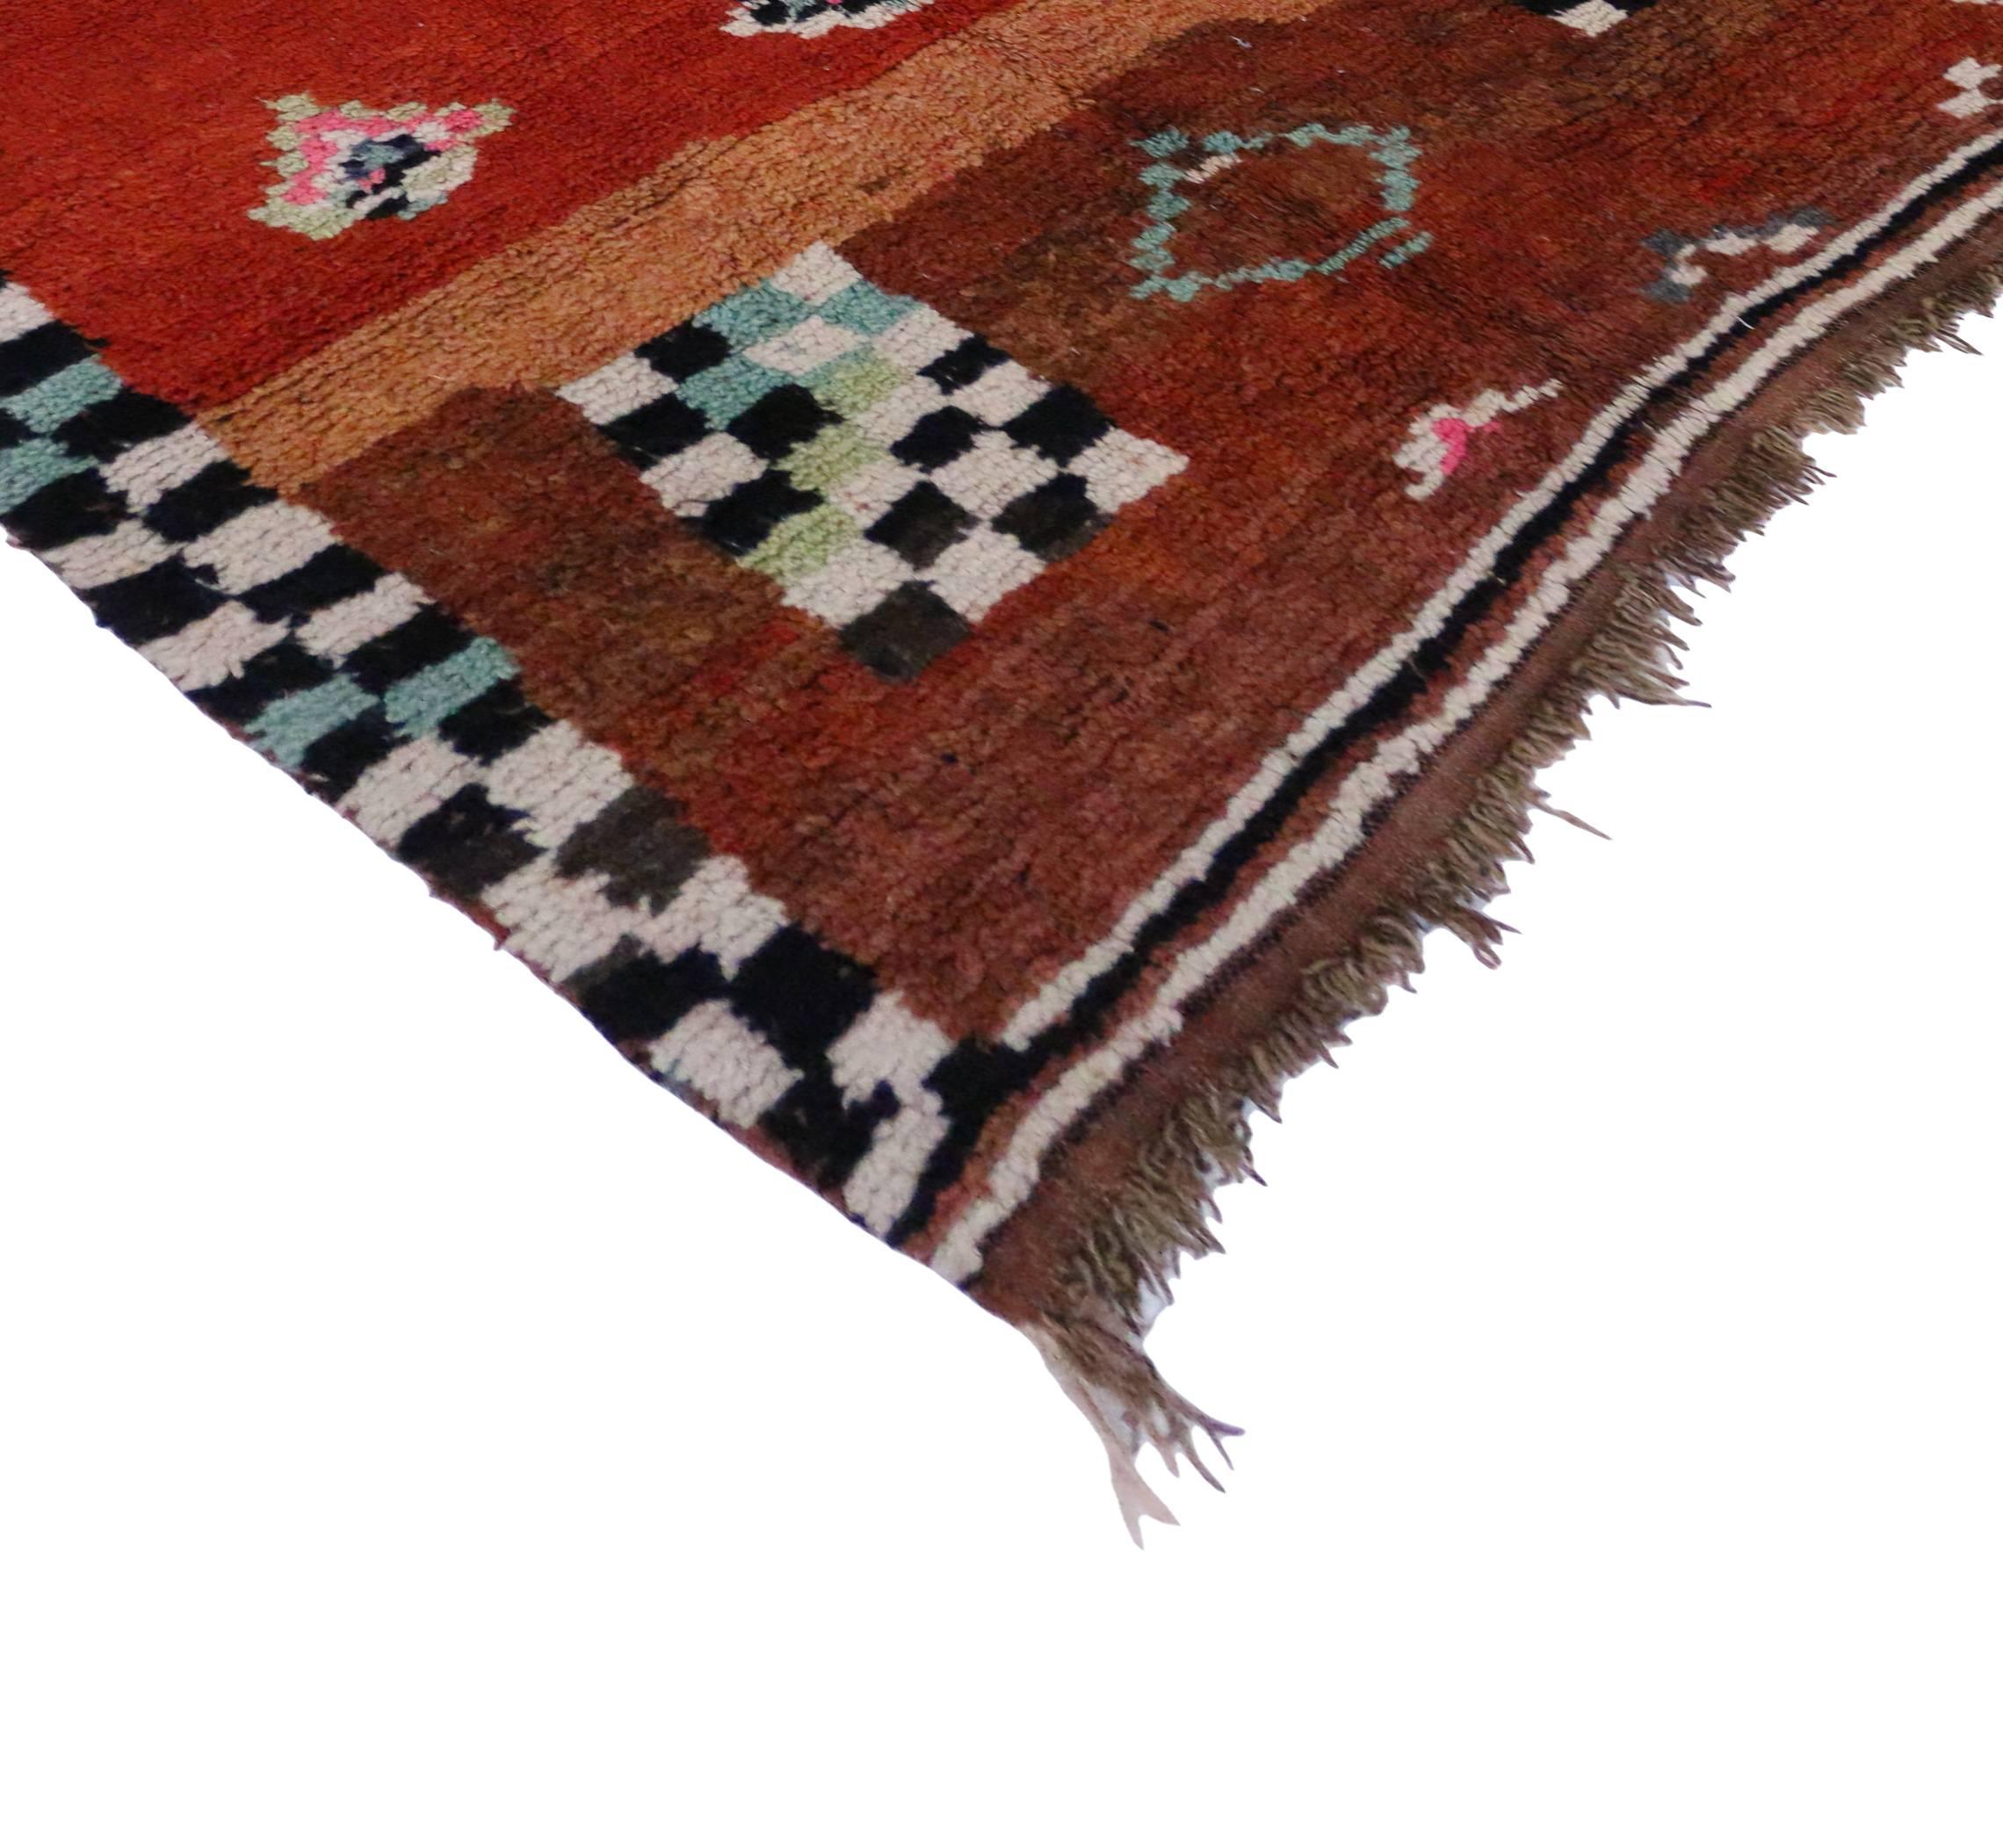 Highly stylish yet casually elegant, this boho chic Berber Moroccan rug with a contemporary abstract style is ideal for nearly any stylish space. Features a multitude of Berber Tribe motifs on an abrashed red field. This tribal design has been given